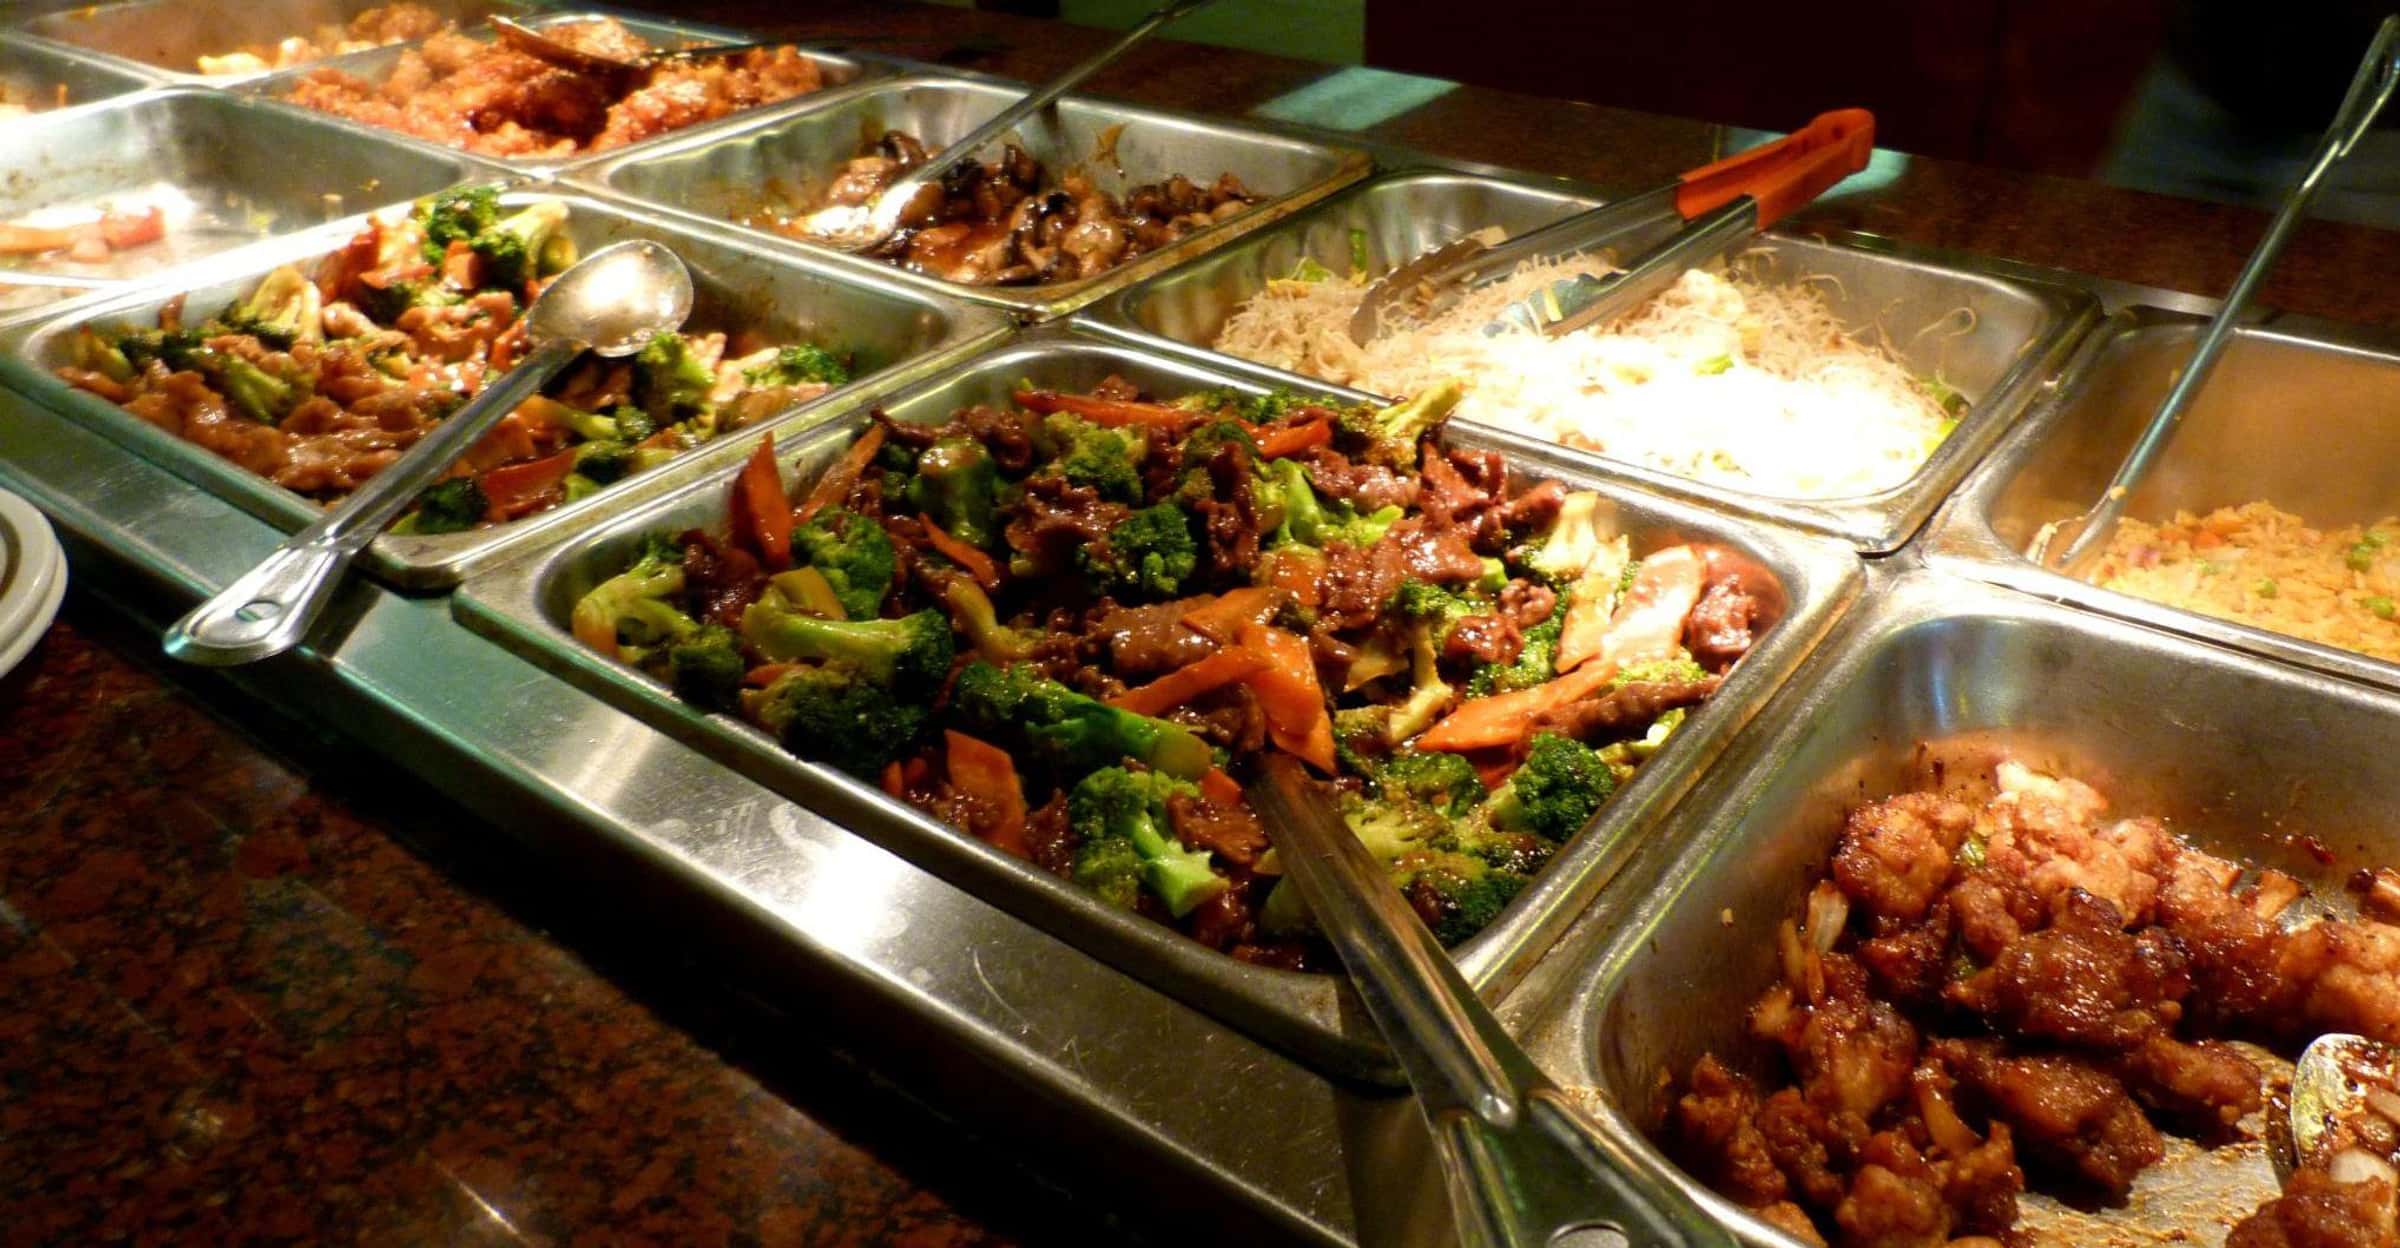 18 Disgusting Buffet Horror Stories That Will Make You Sick